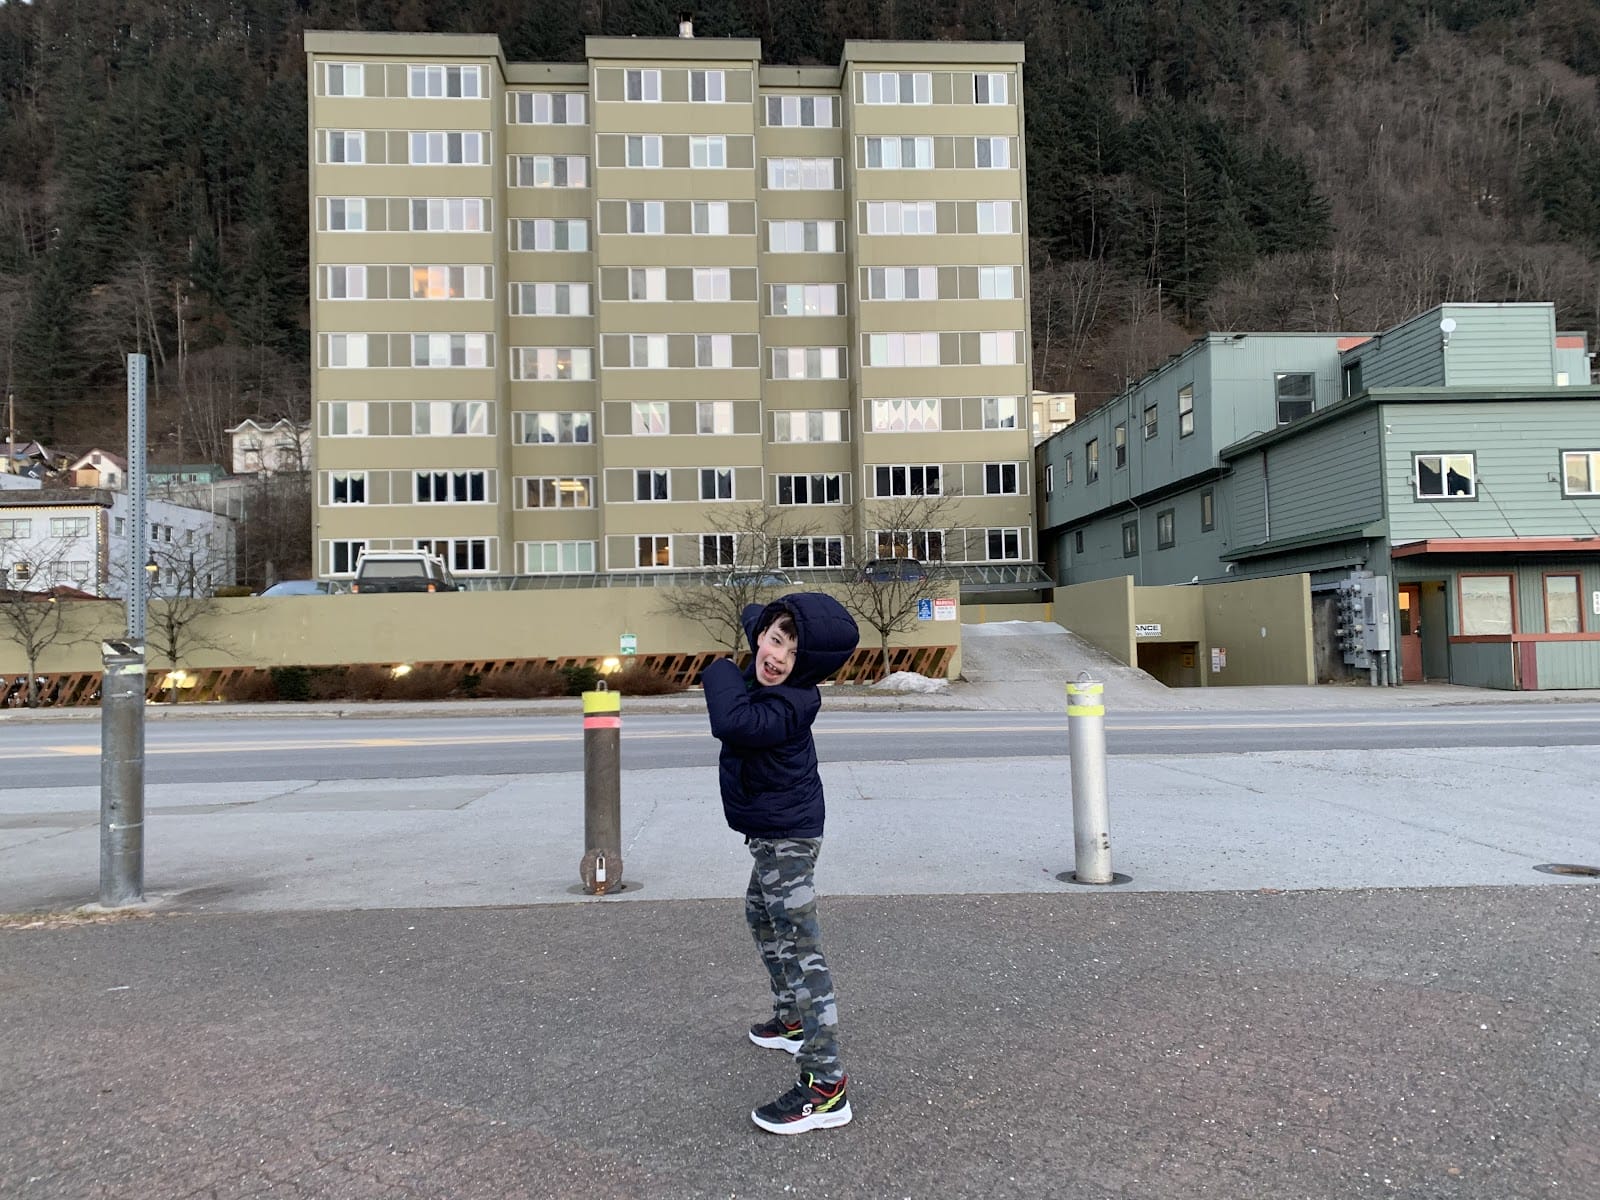 Child pointing at a tall building behind him.